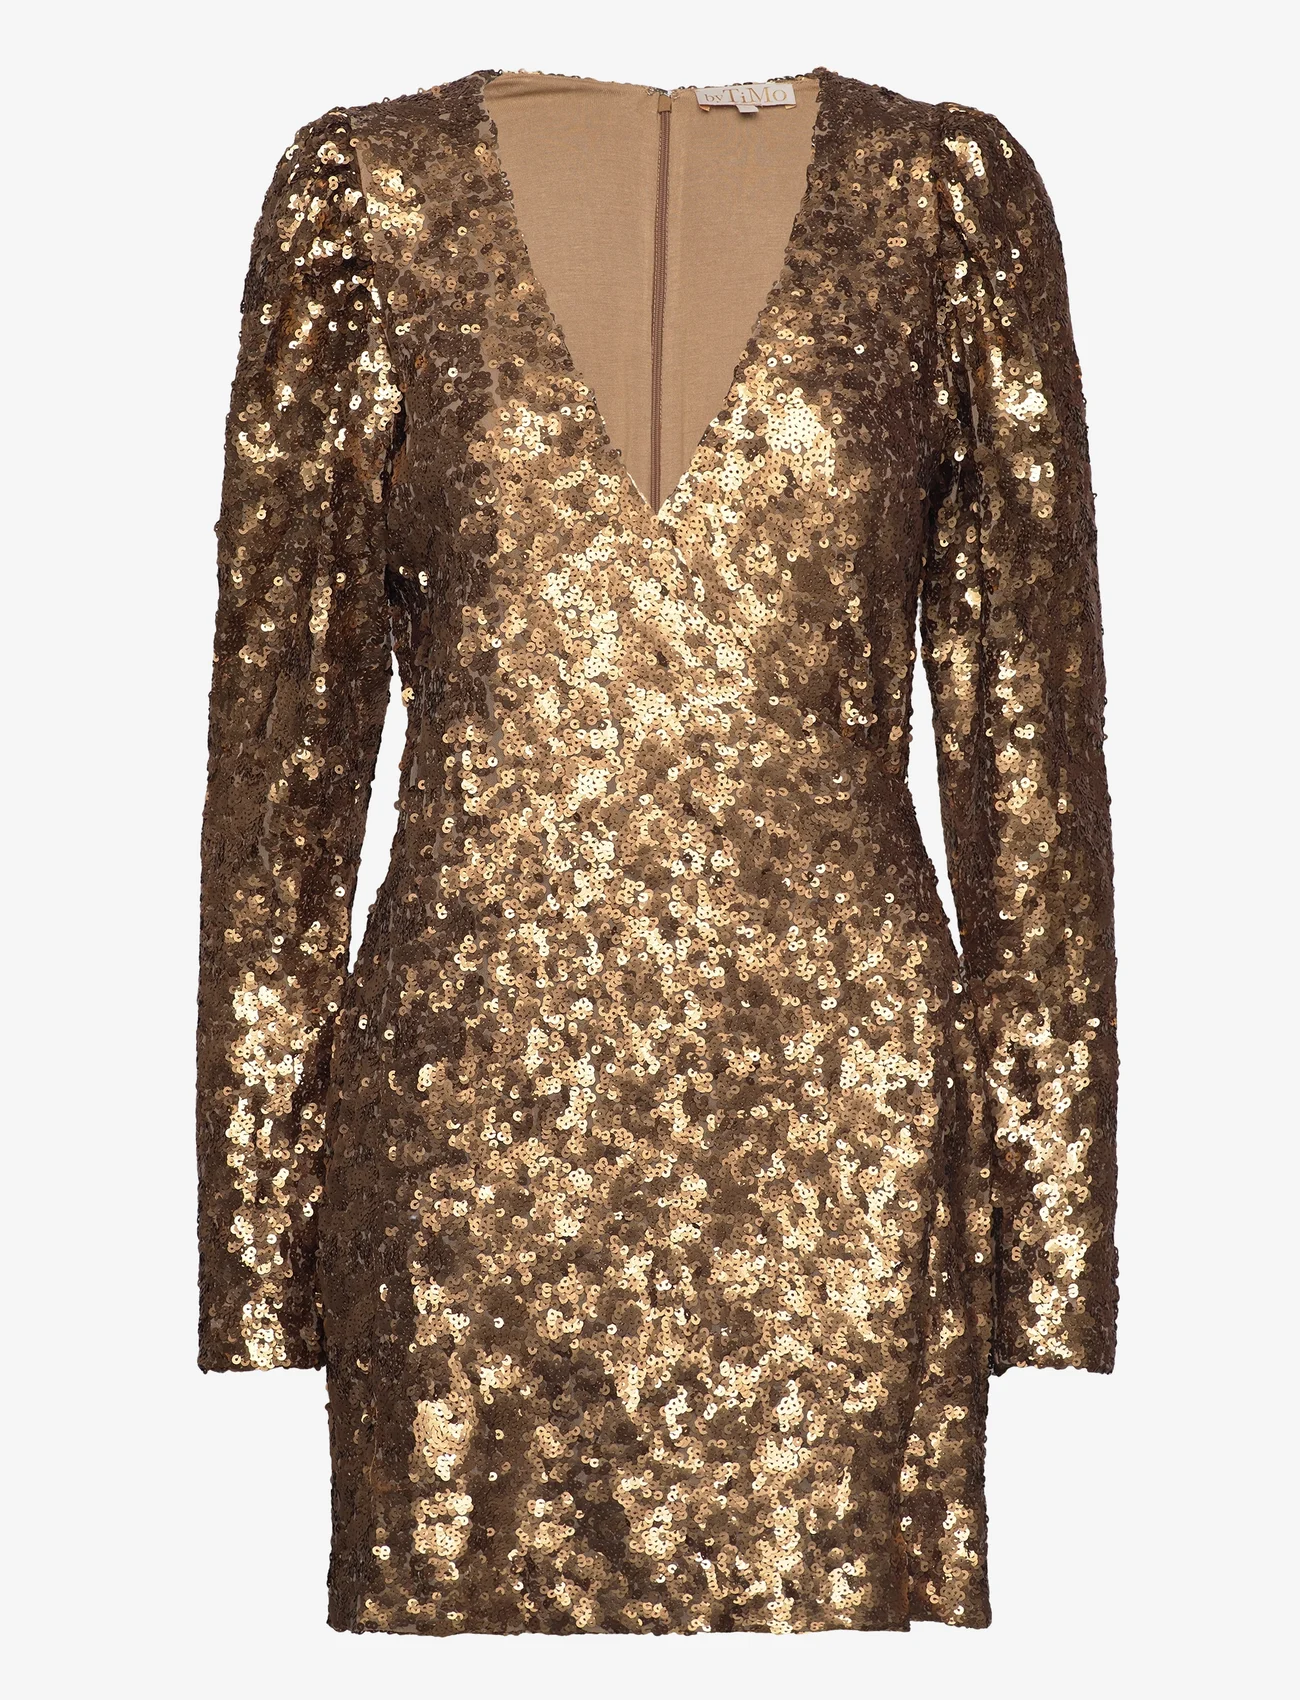 by Ti Mo - Sequins Mini Dress - peoriided outlet-hindadega - 009 - golden - 0